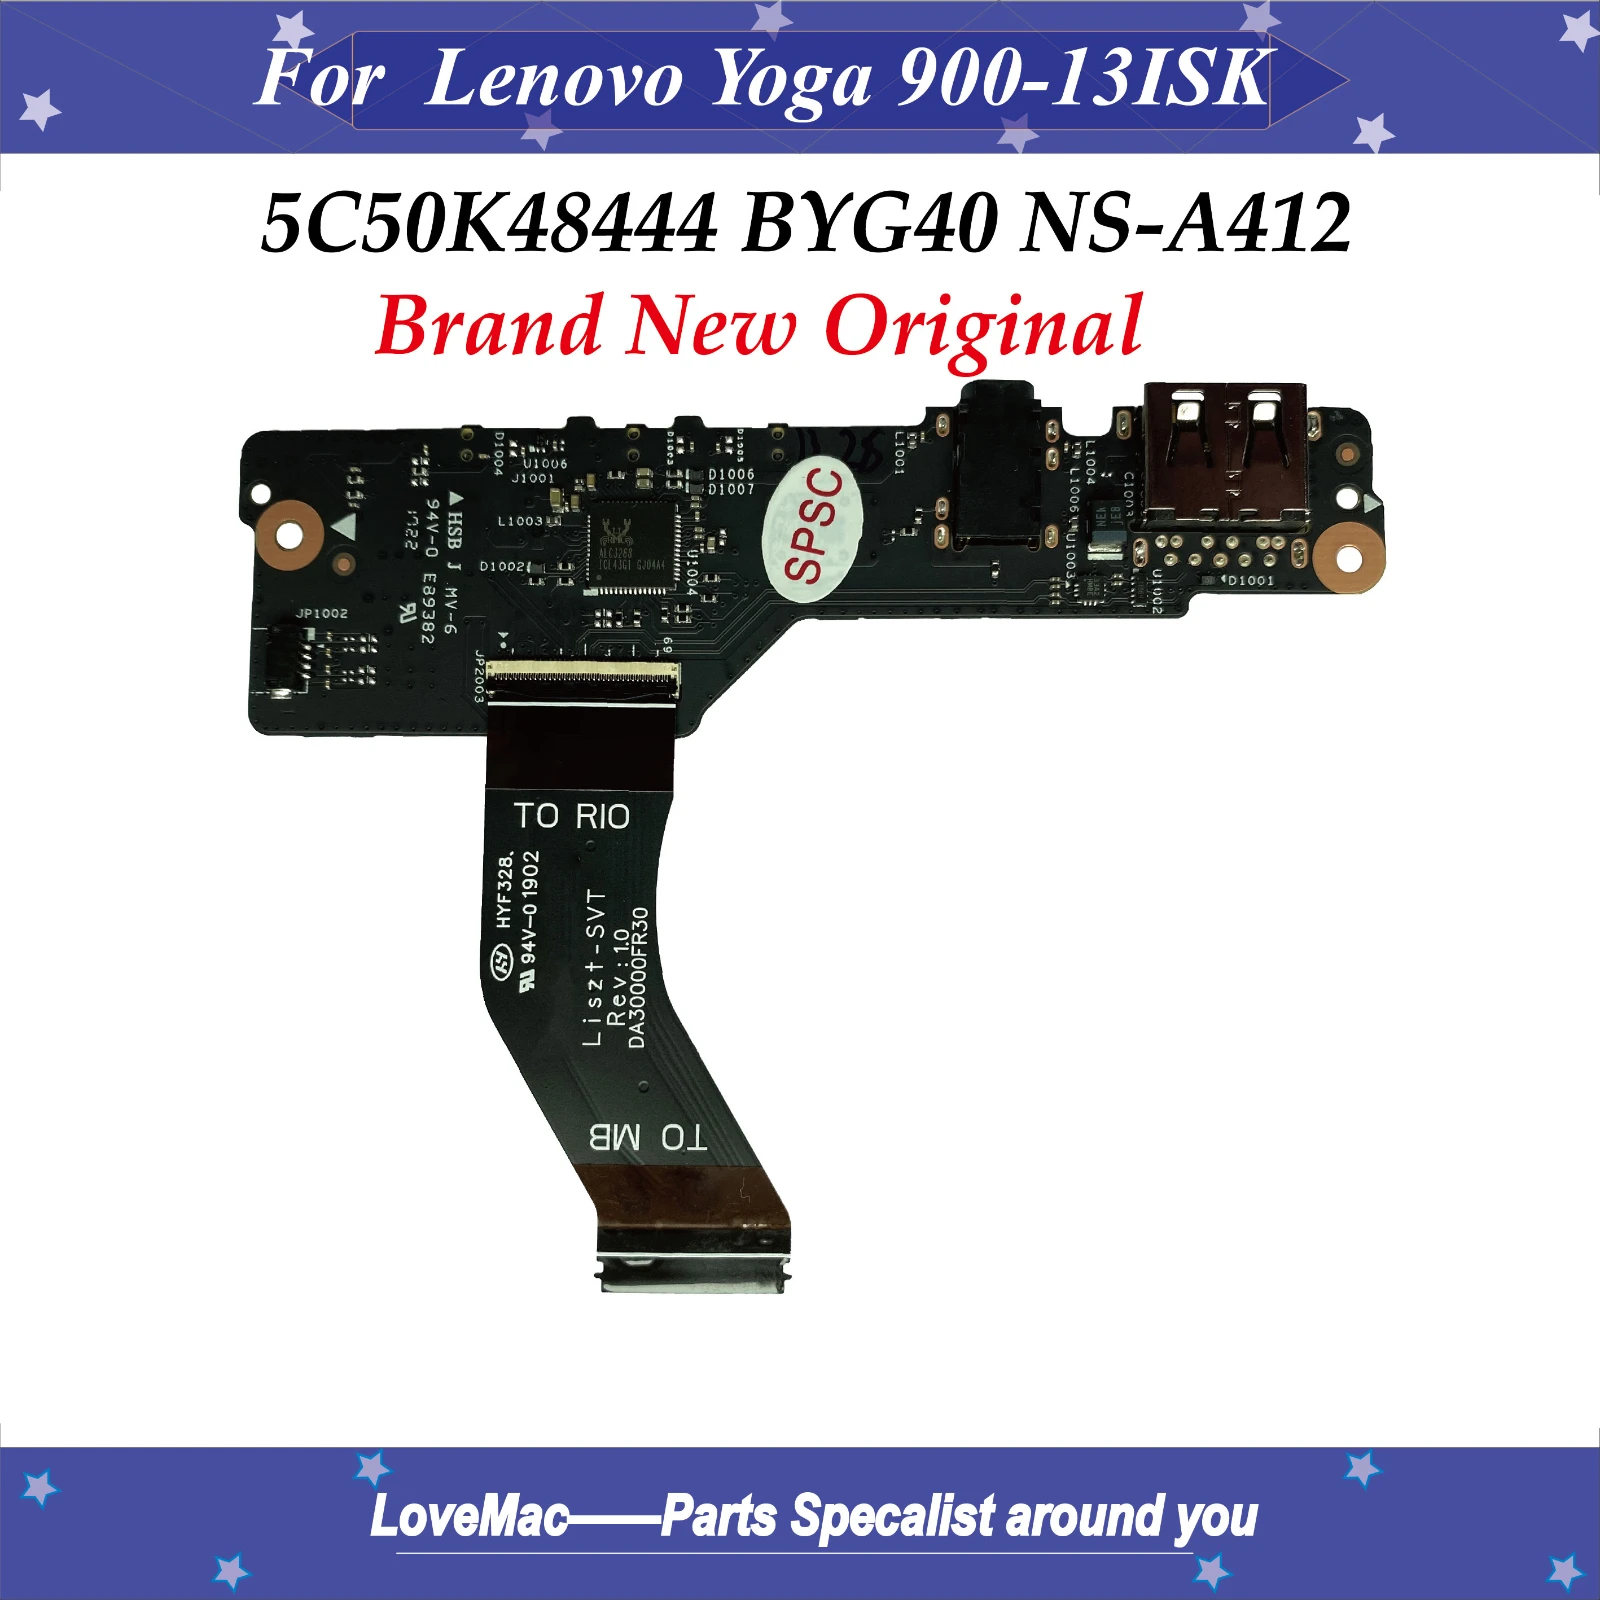 

High quality Brand New BYG40 NS-A412 For Lenovo Yoga 900-13ISK USB Audio board Power button FRU 5C50K48444 100% Fully Tested